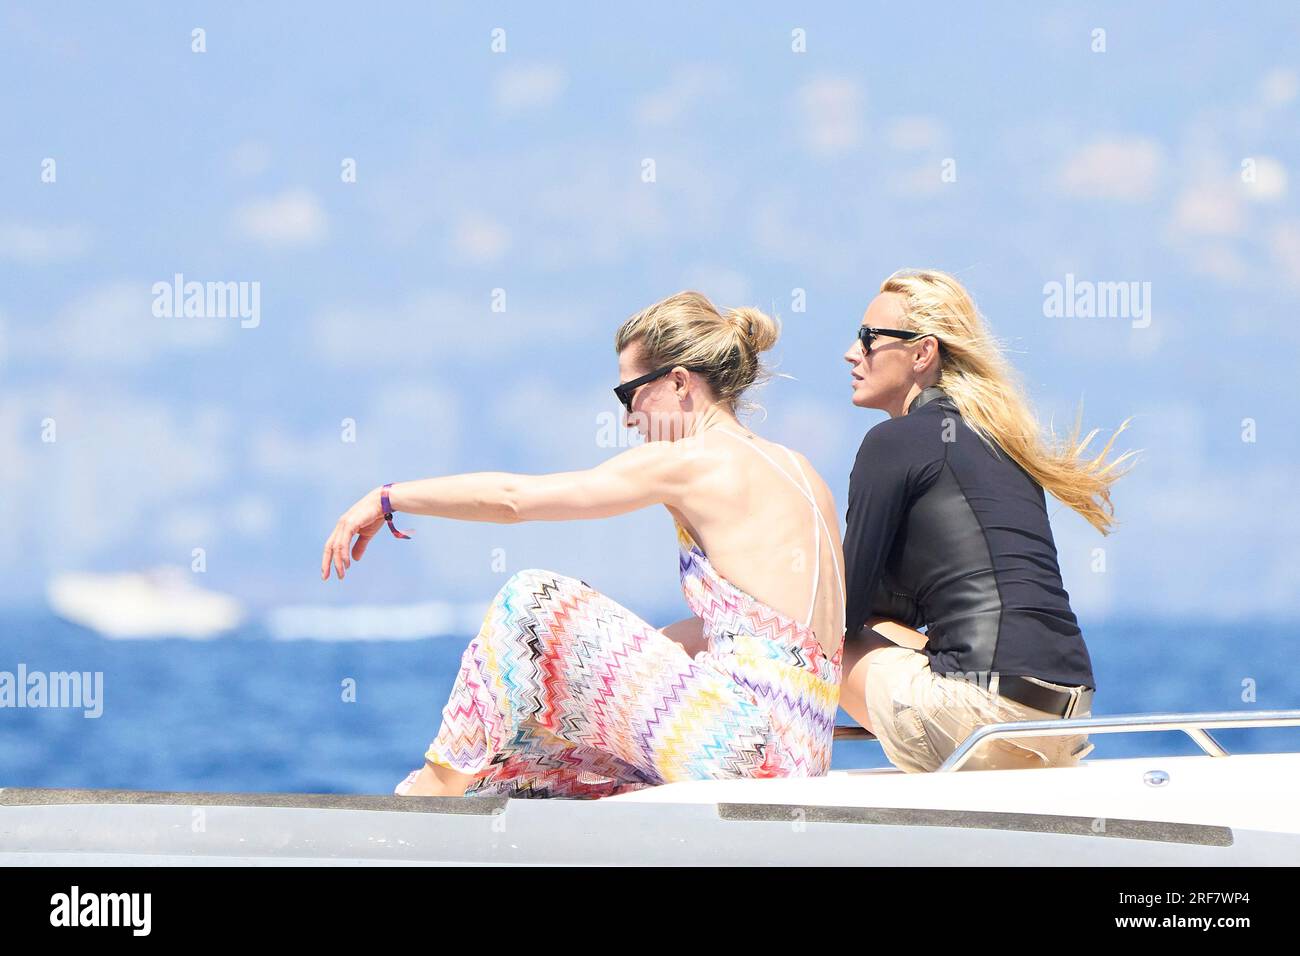 Palma. Spain. 20230801,  Carlos Moya, Carolina Cerezuela on board of a private boat during 41st Copa del Rey Mapfre Sailing Cup - Day 2 on August 1, 2023 in Palma, Spain Stock Photo